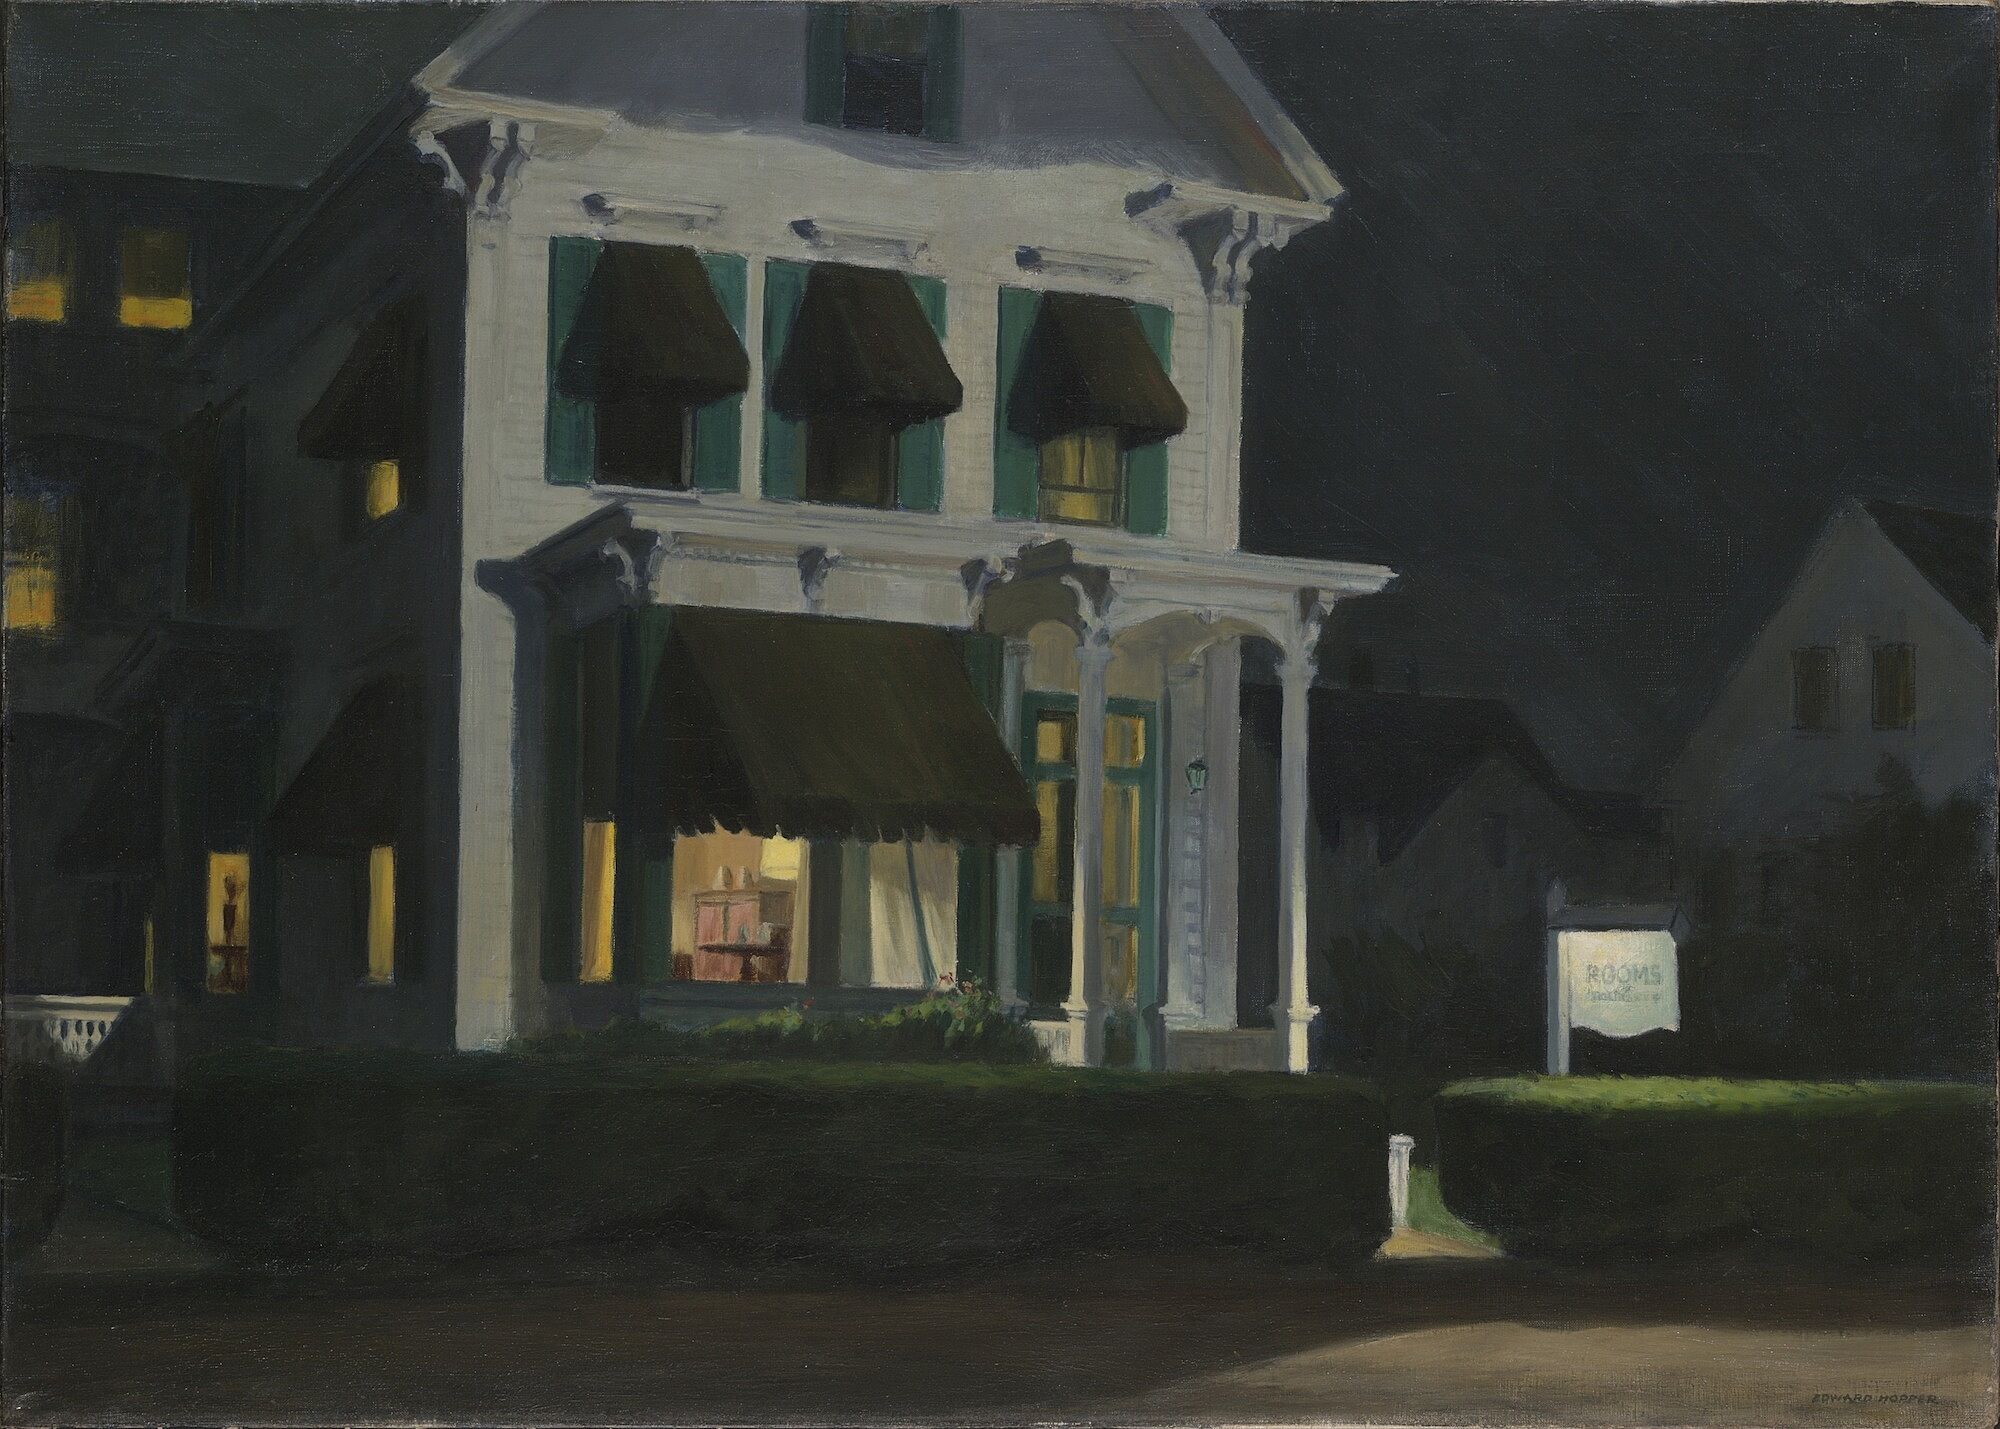 A painting of a house at night with the lights on inside.